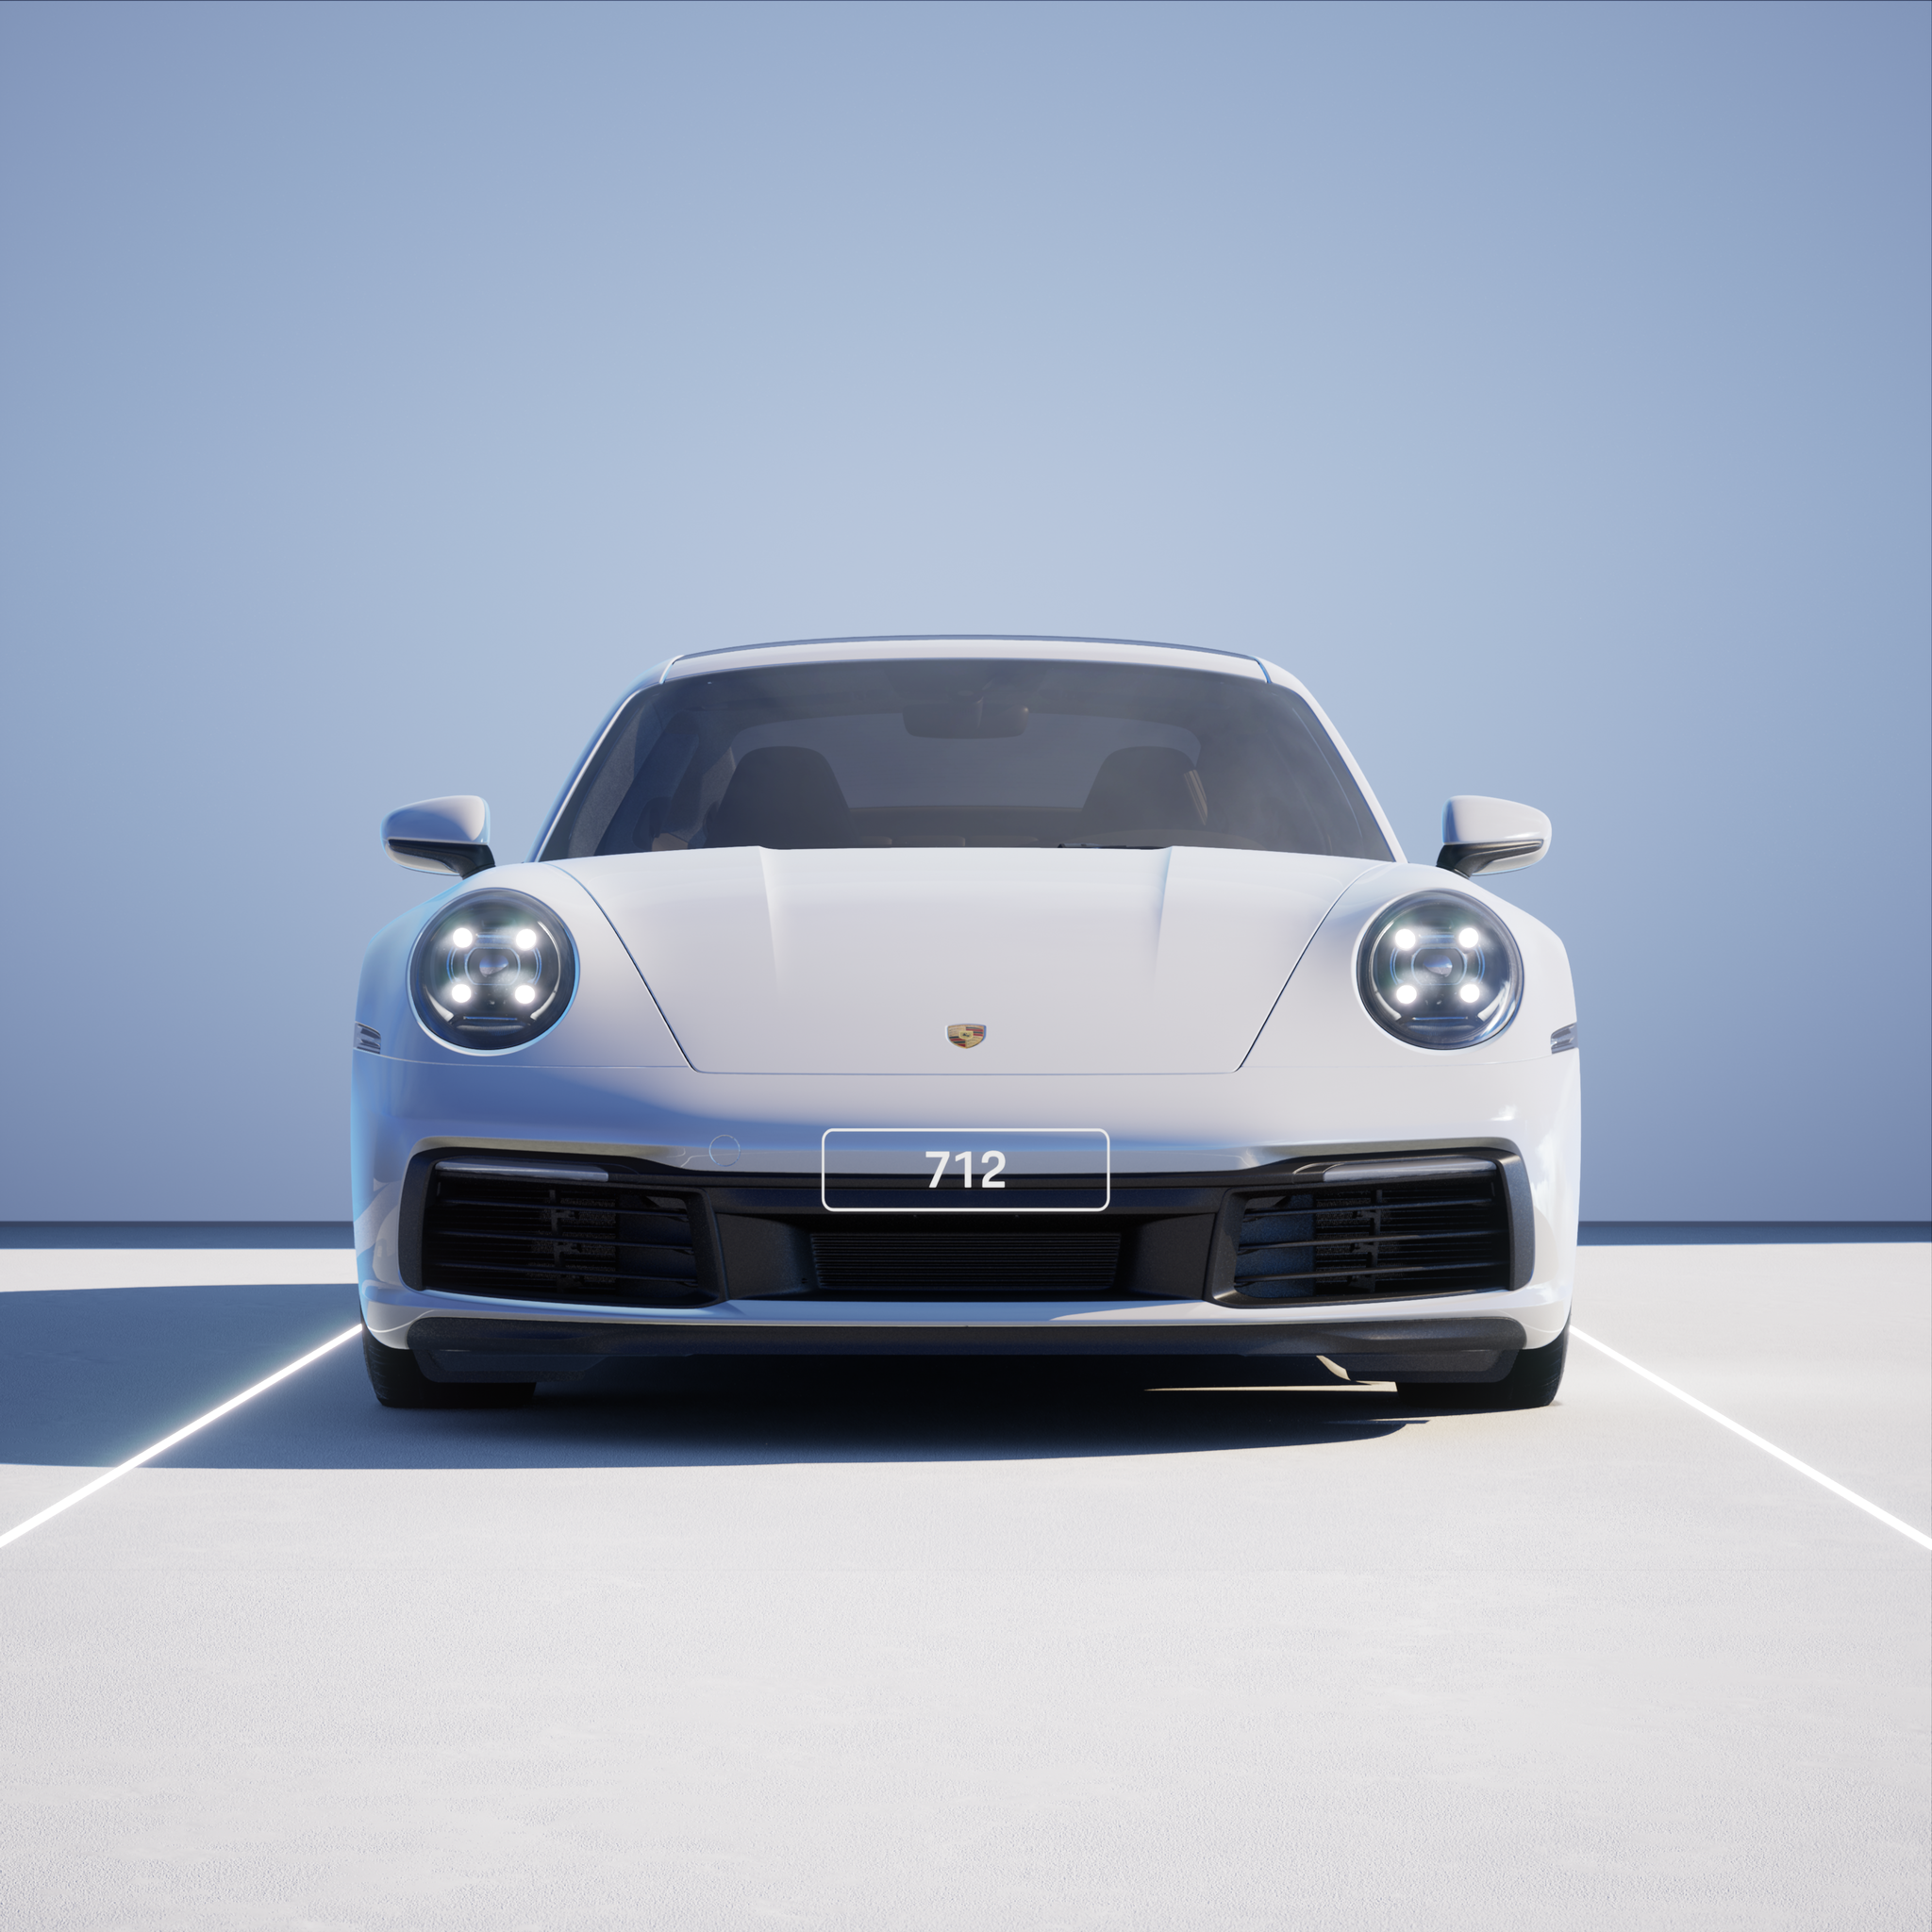 The PORSCHΞ 911 712 image in phase